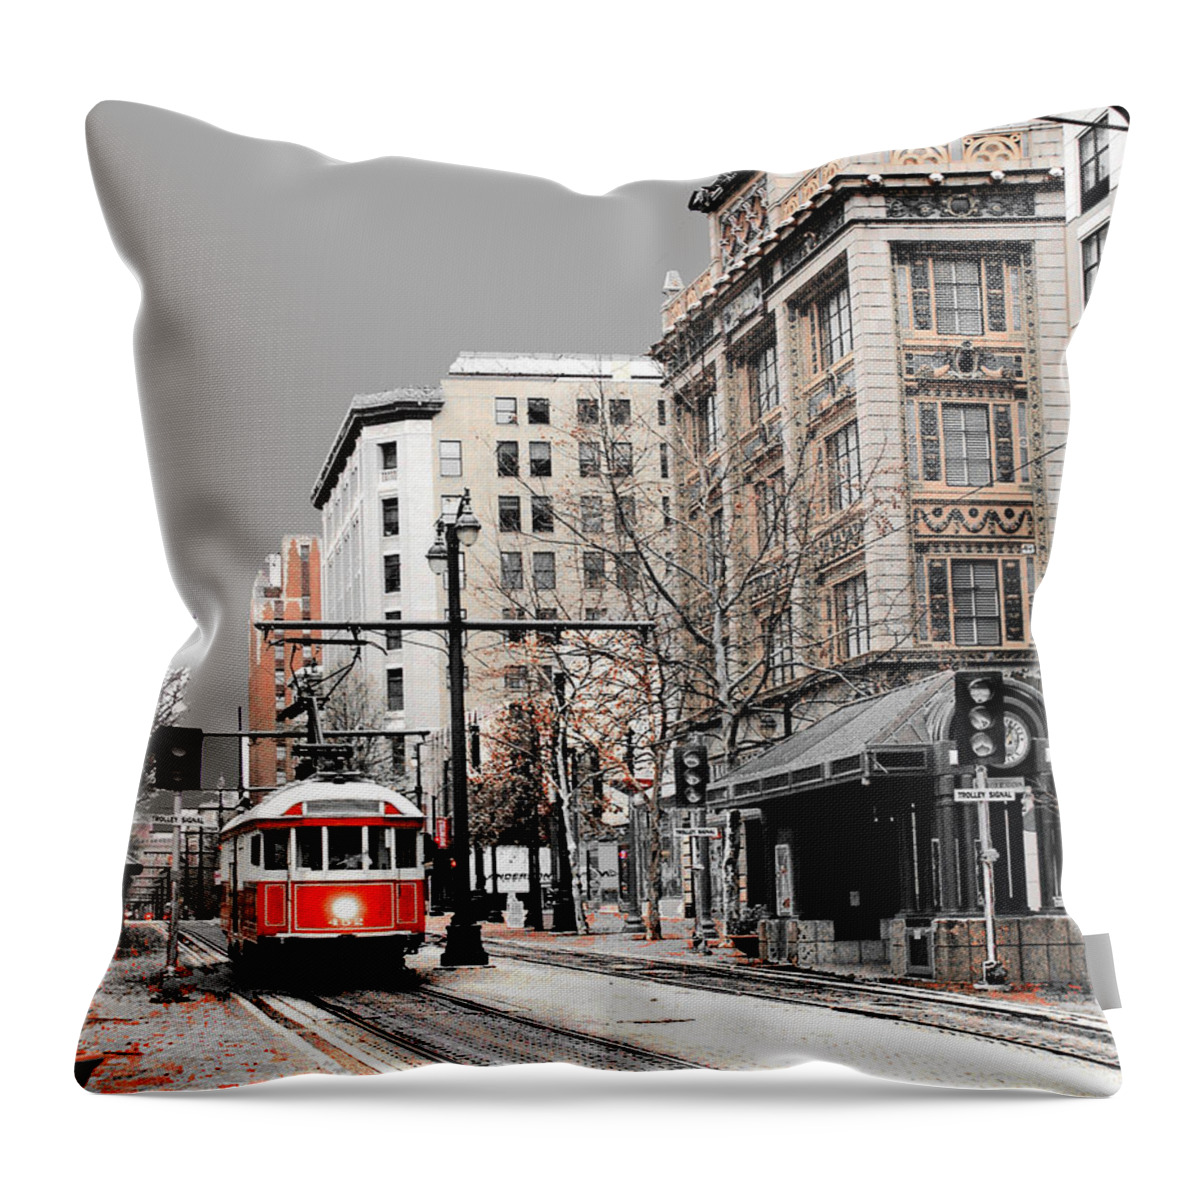 Trolley Throw Pillow featuring the photograph Gray Line Trolley by Lizi Beard-Ward